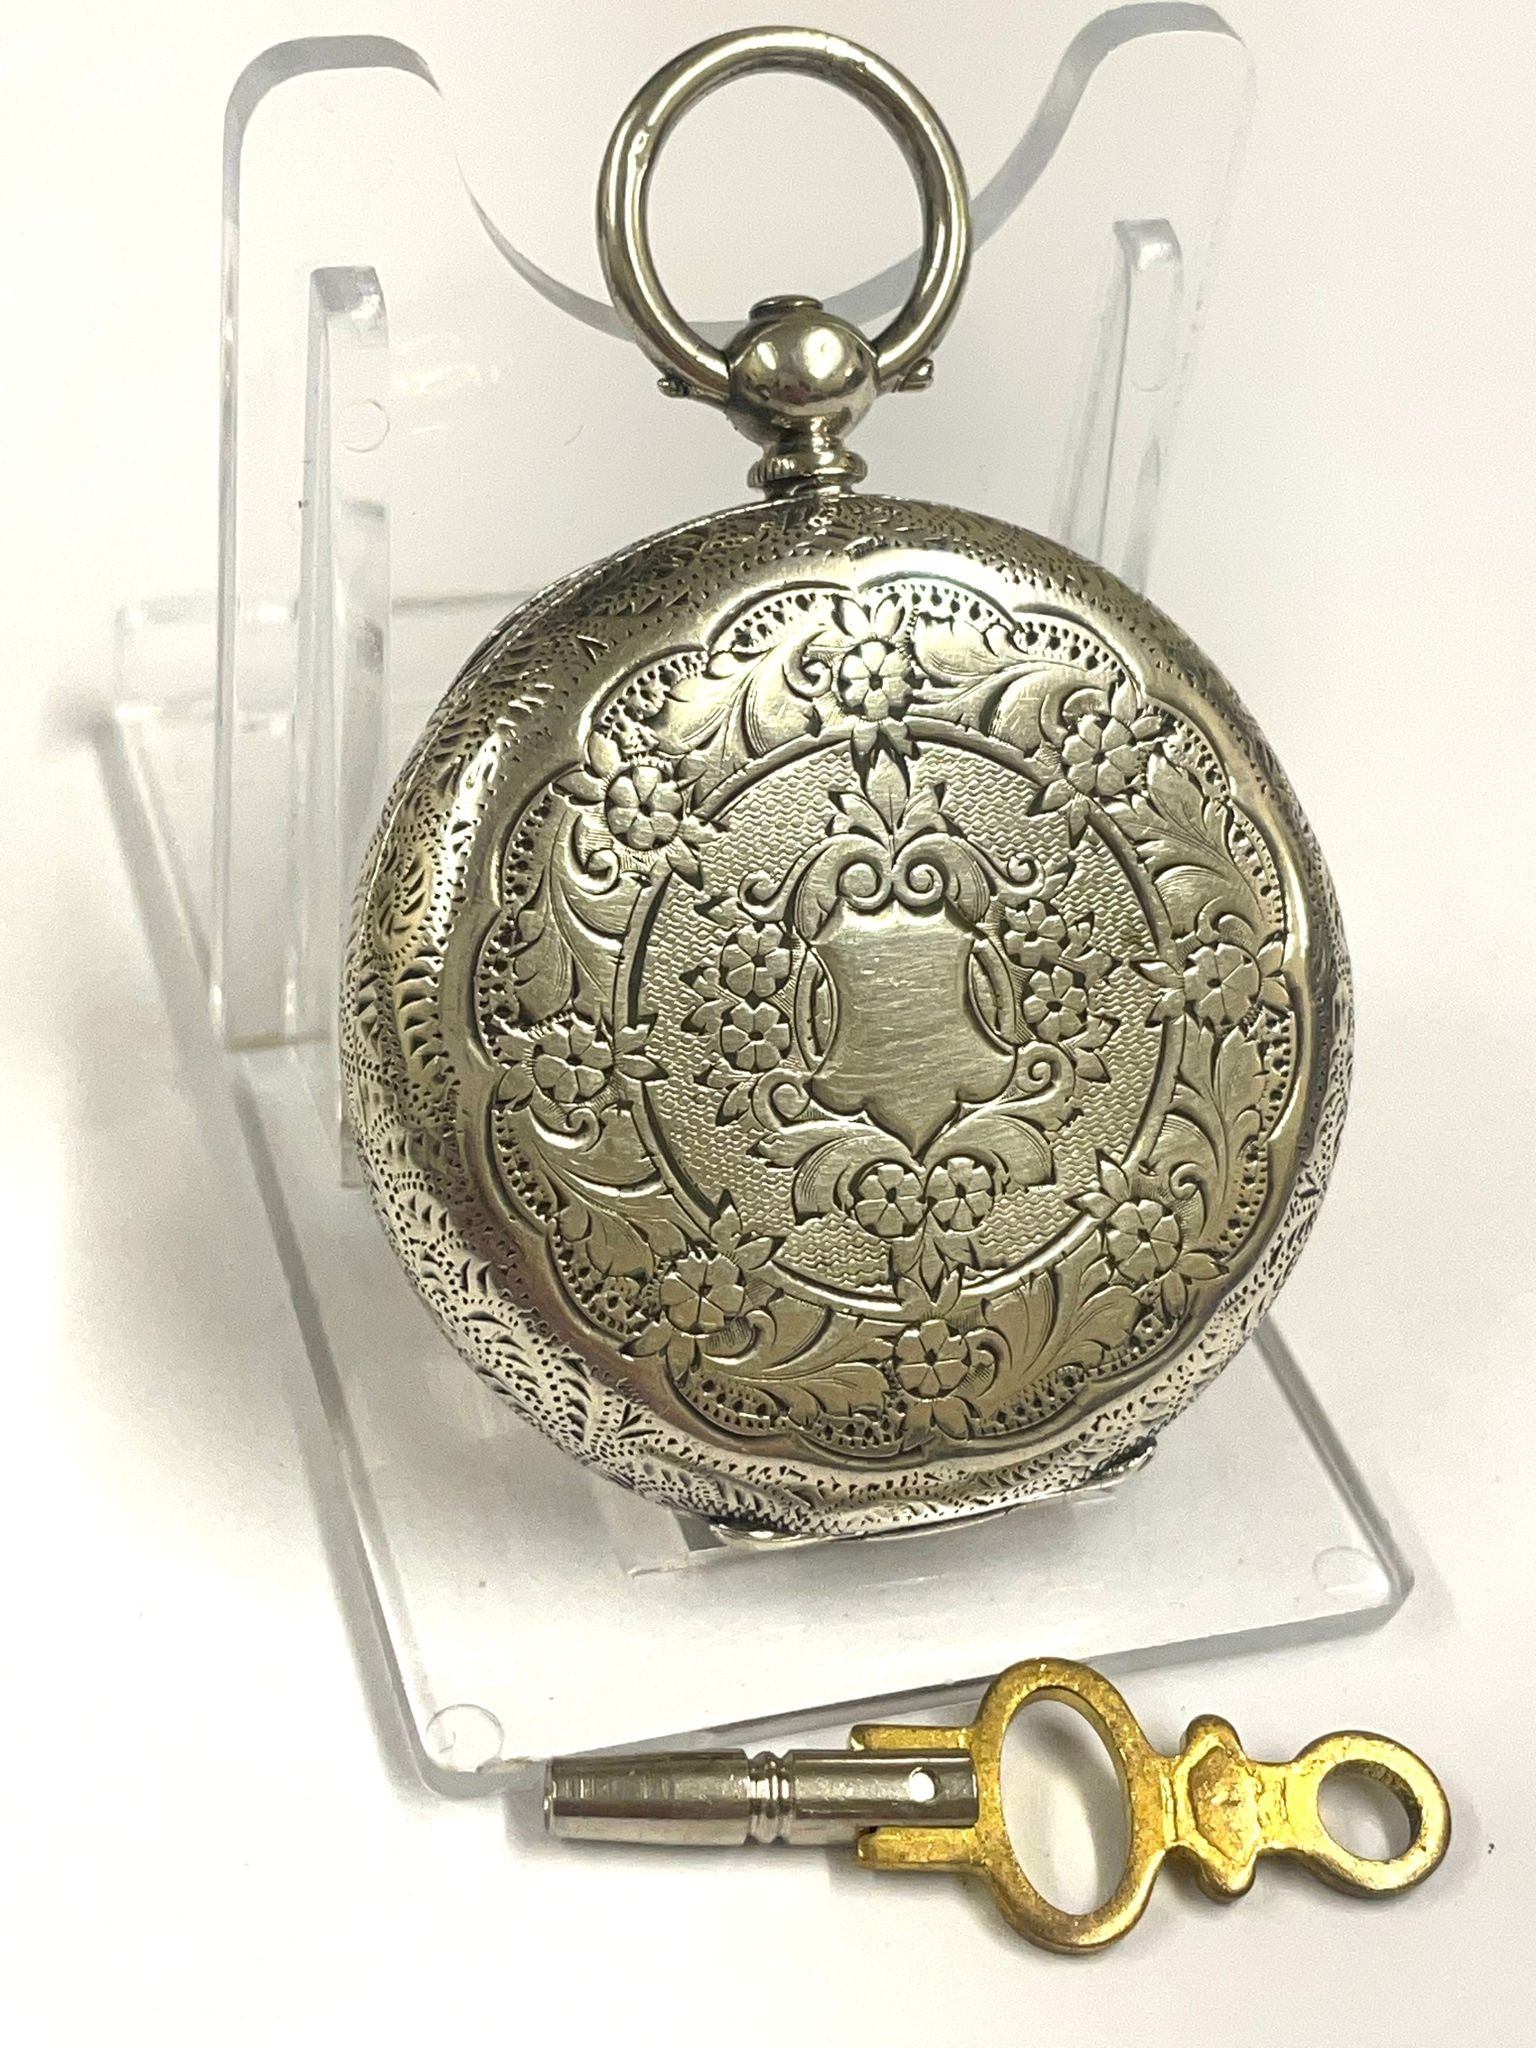 Antique silver ladies pocket watch working - Image 4 of 5